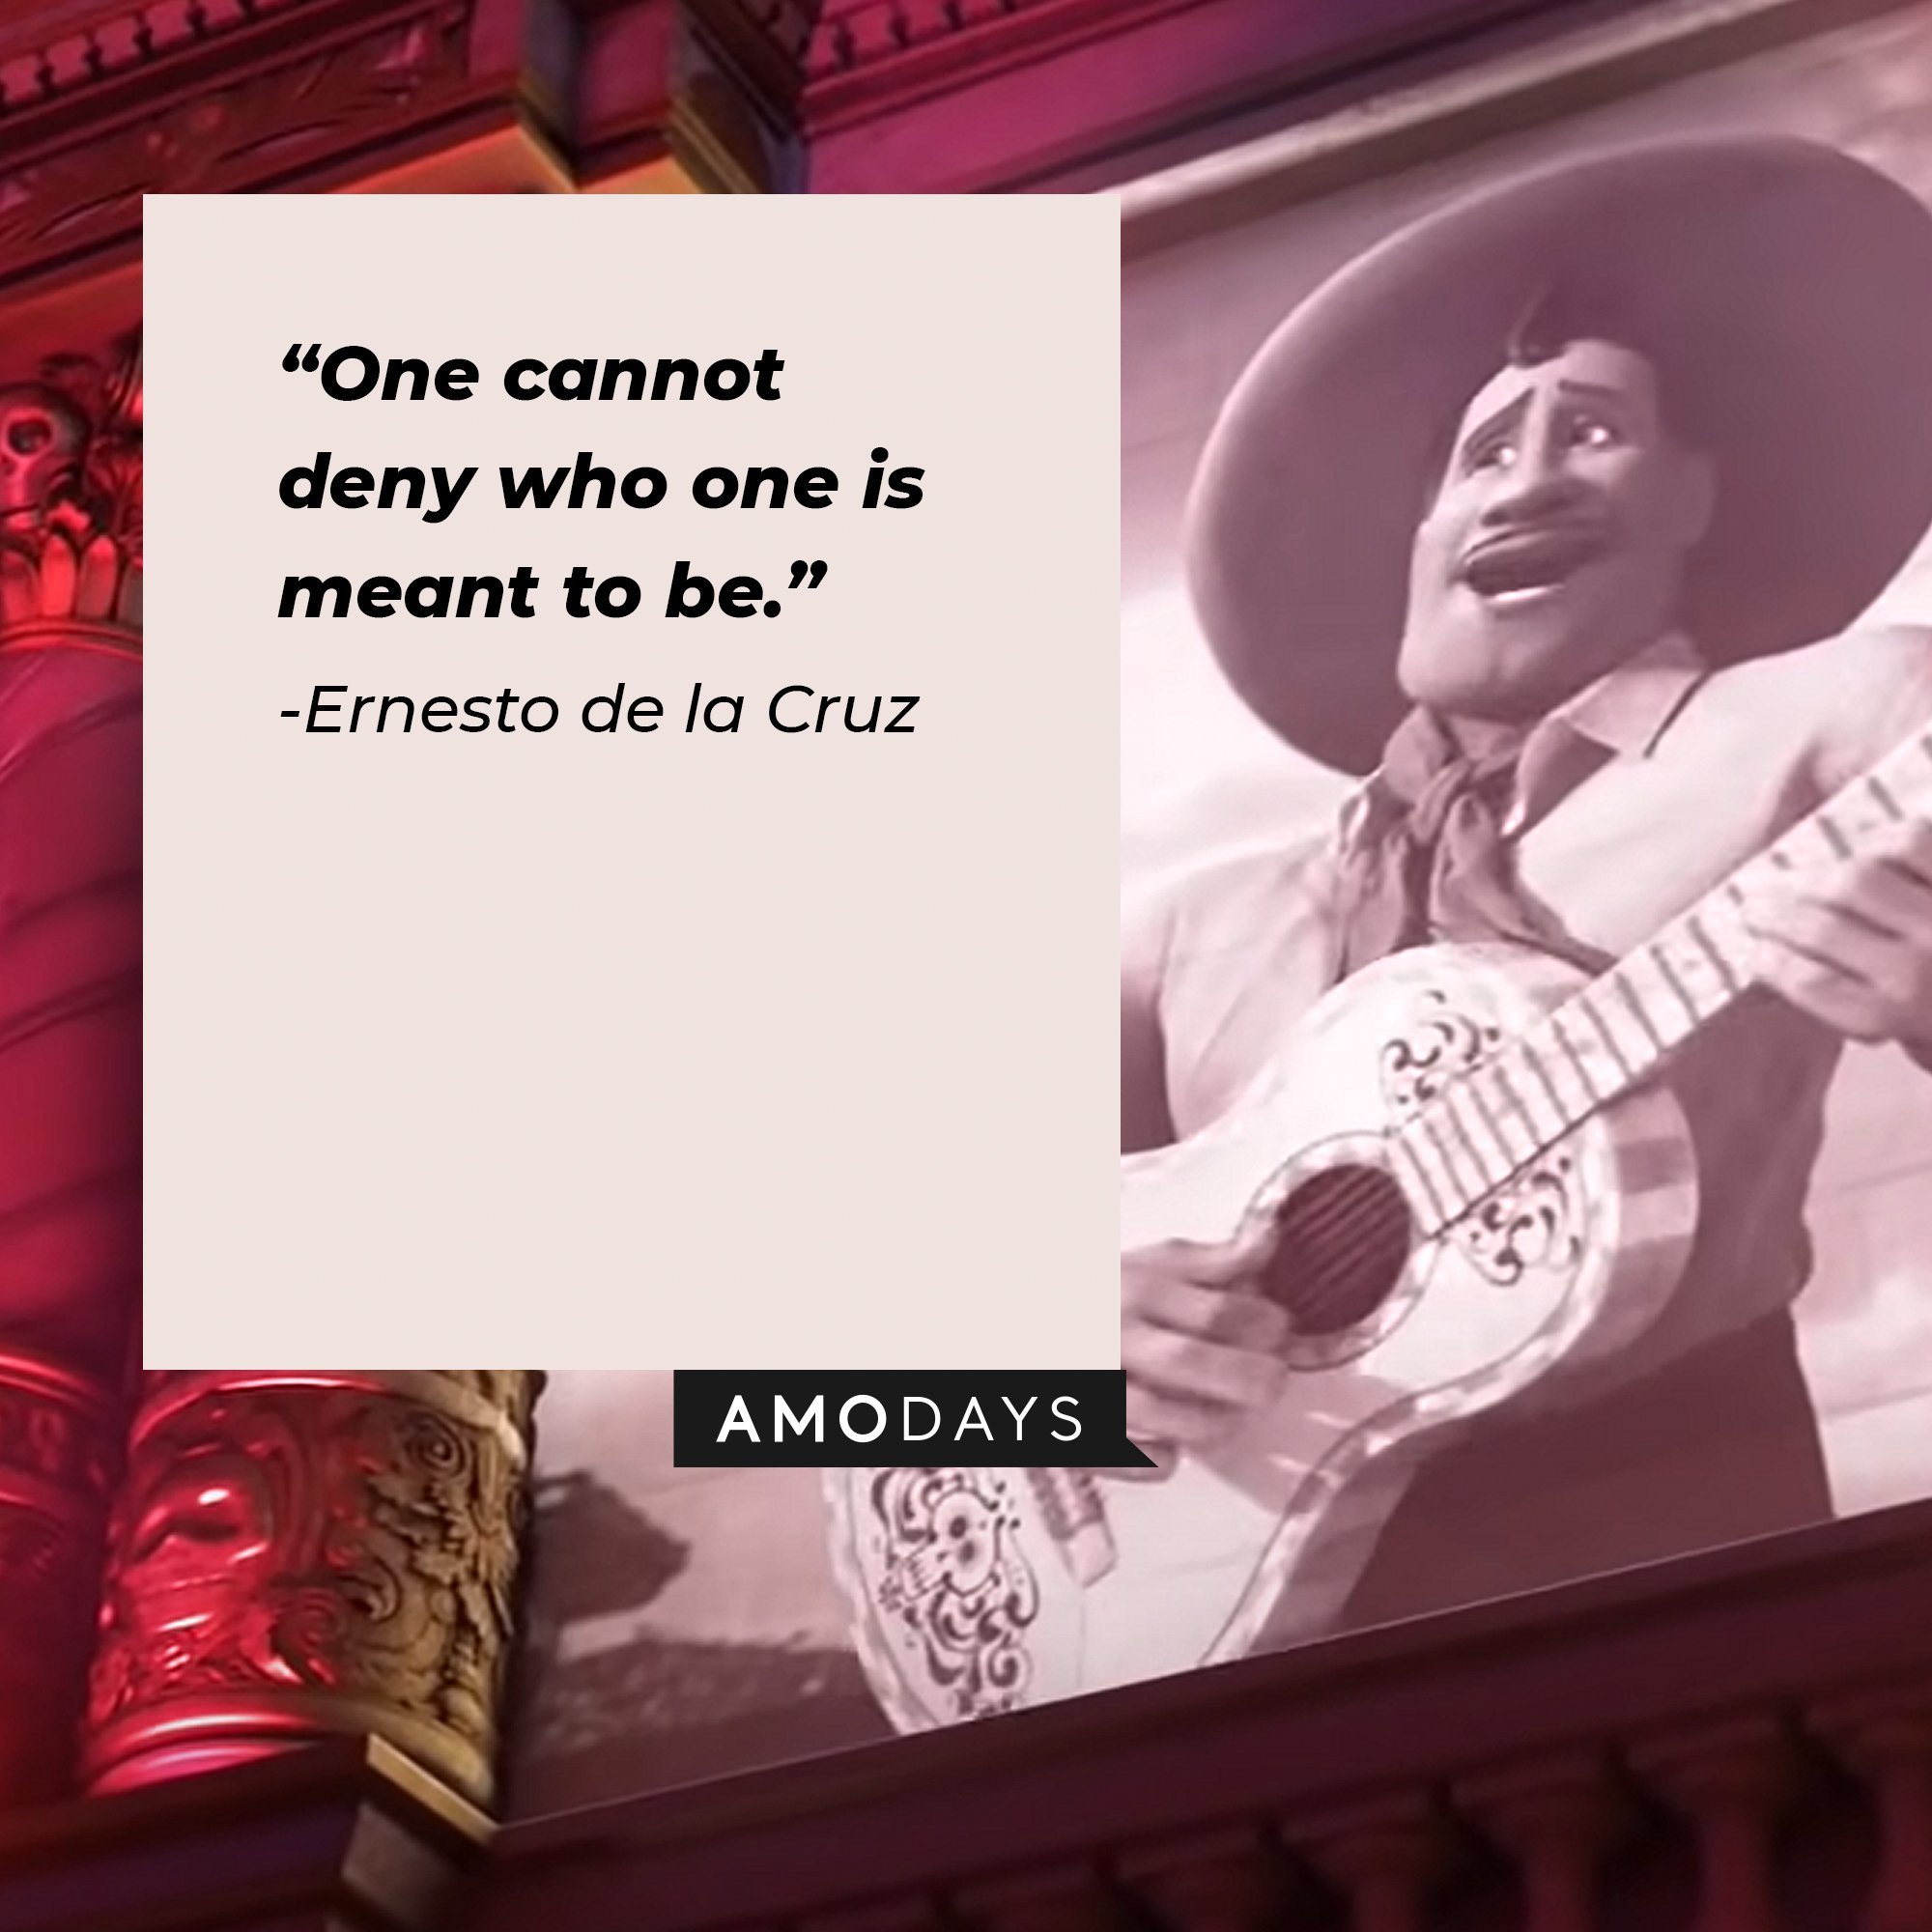 Ernesto de la Cruz's quote: “One cannot deny who one is meant to be.” | Image: AmoDays